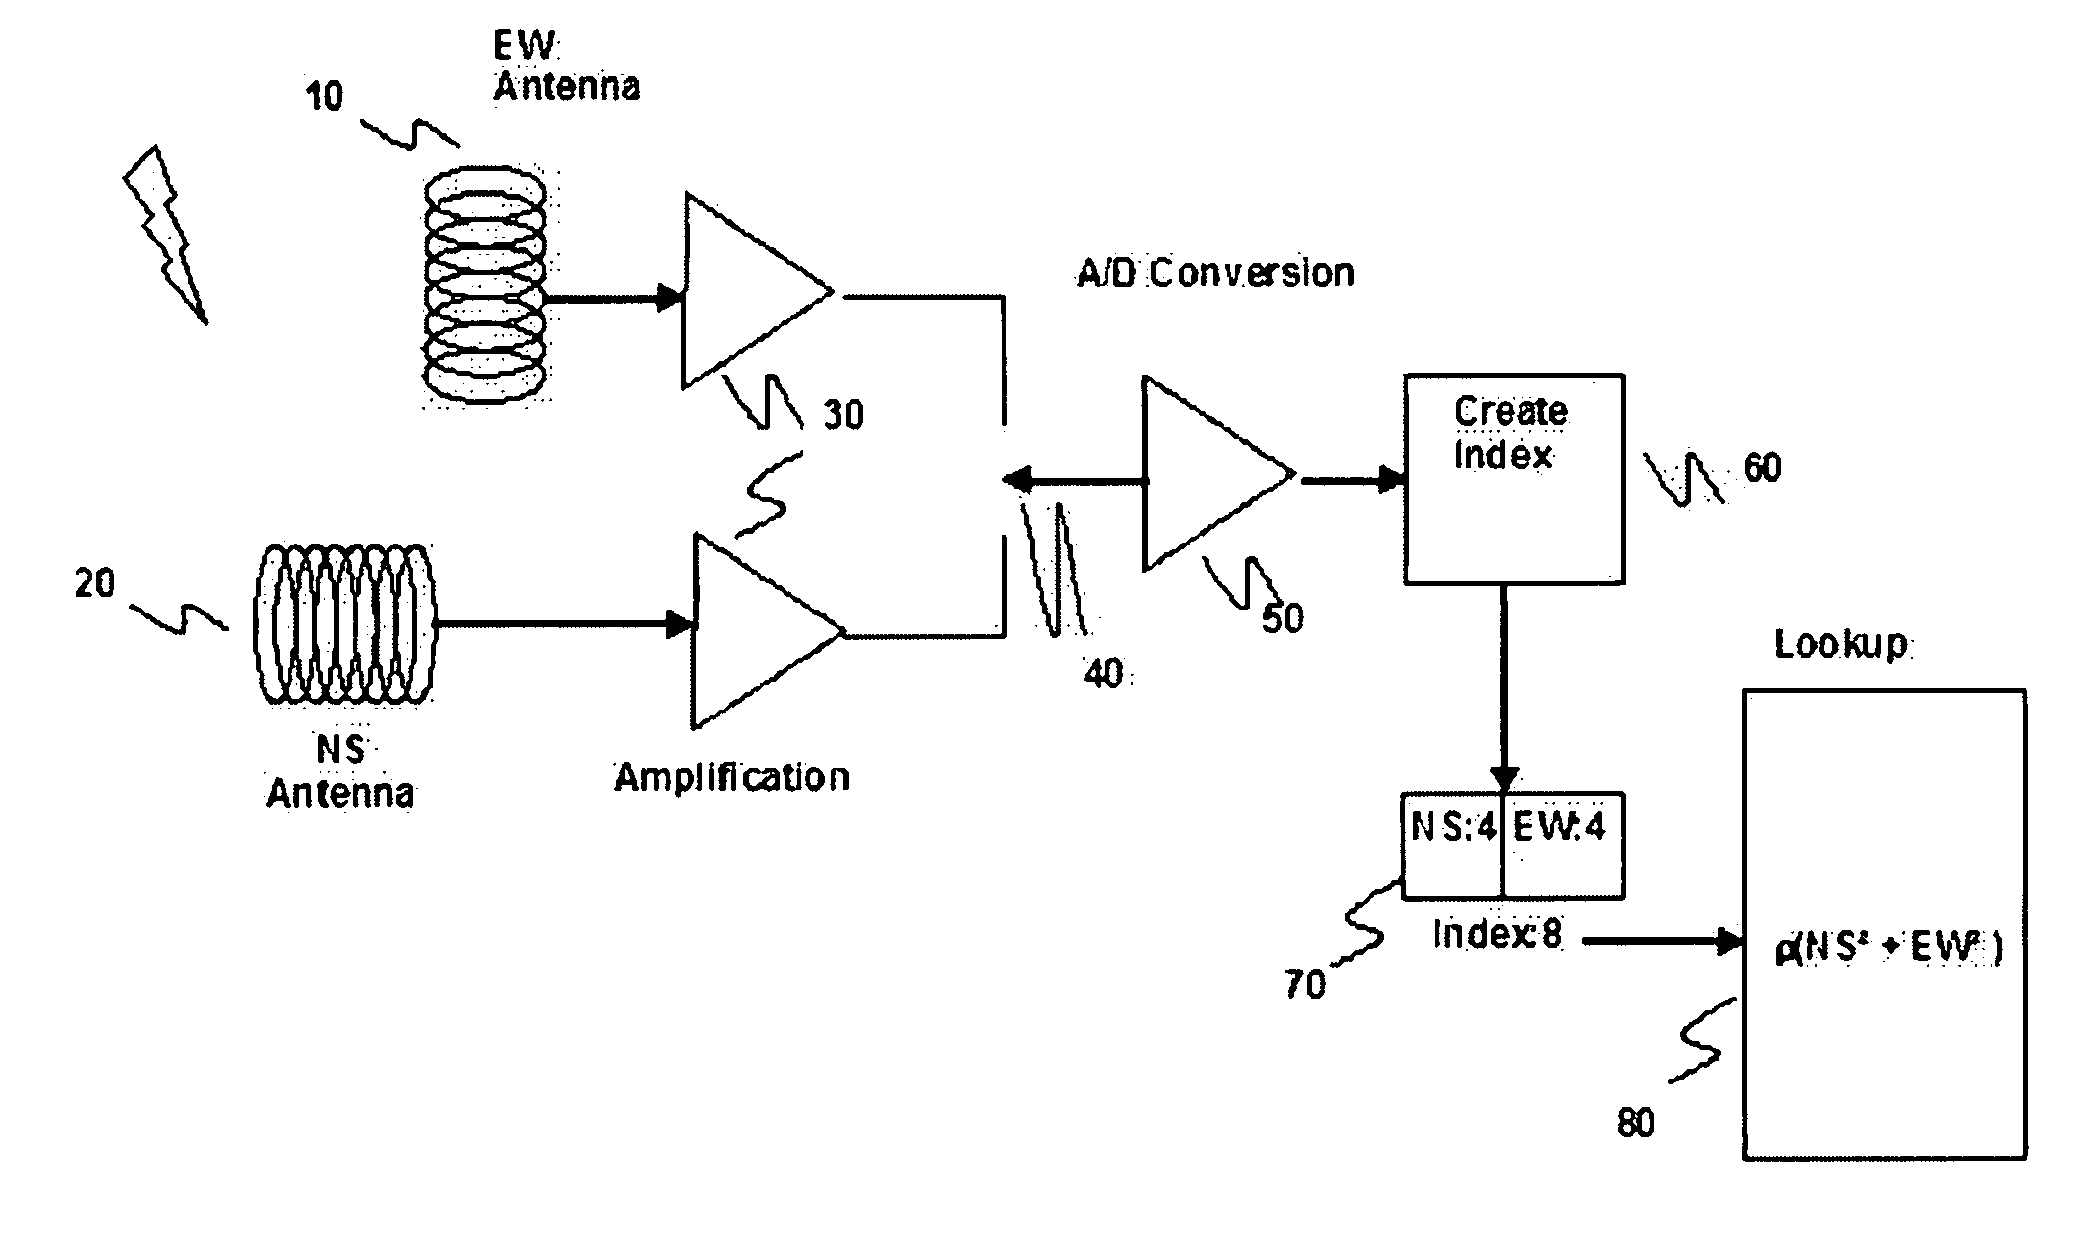 Apparatus for low cost lightning detection